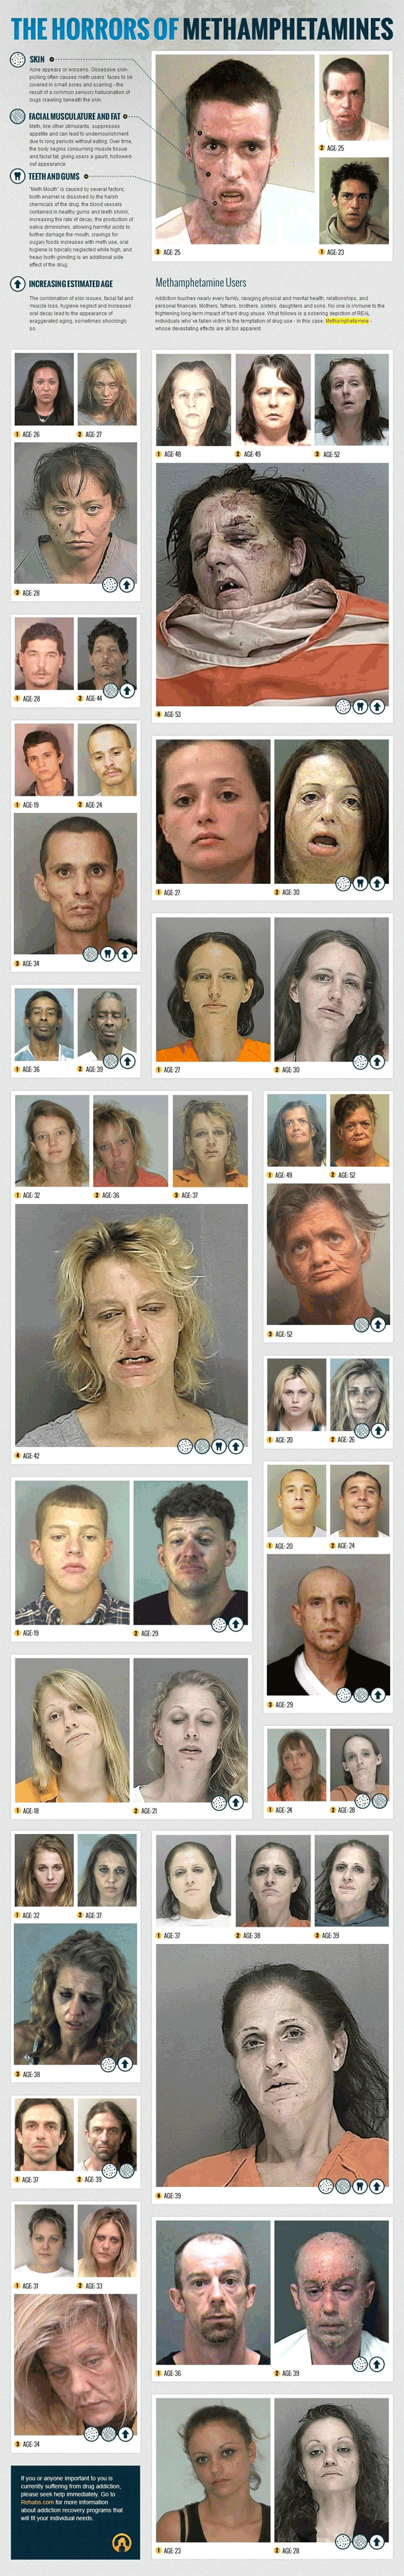 Meth Users - Horrific Before &amp; After Photographs 